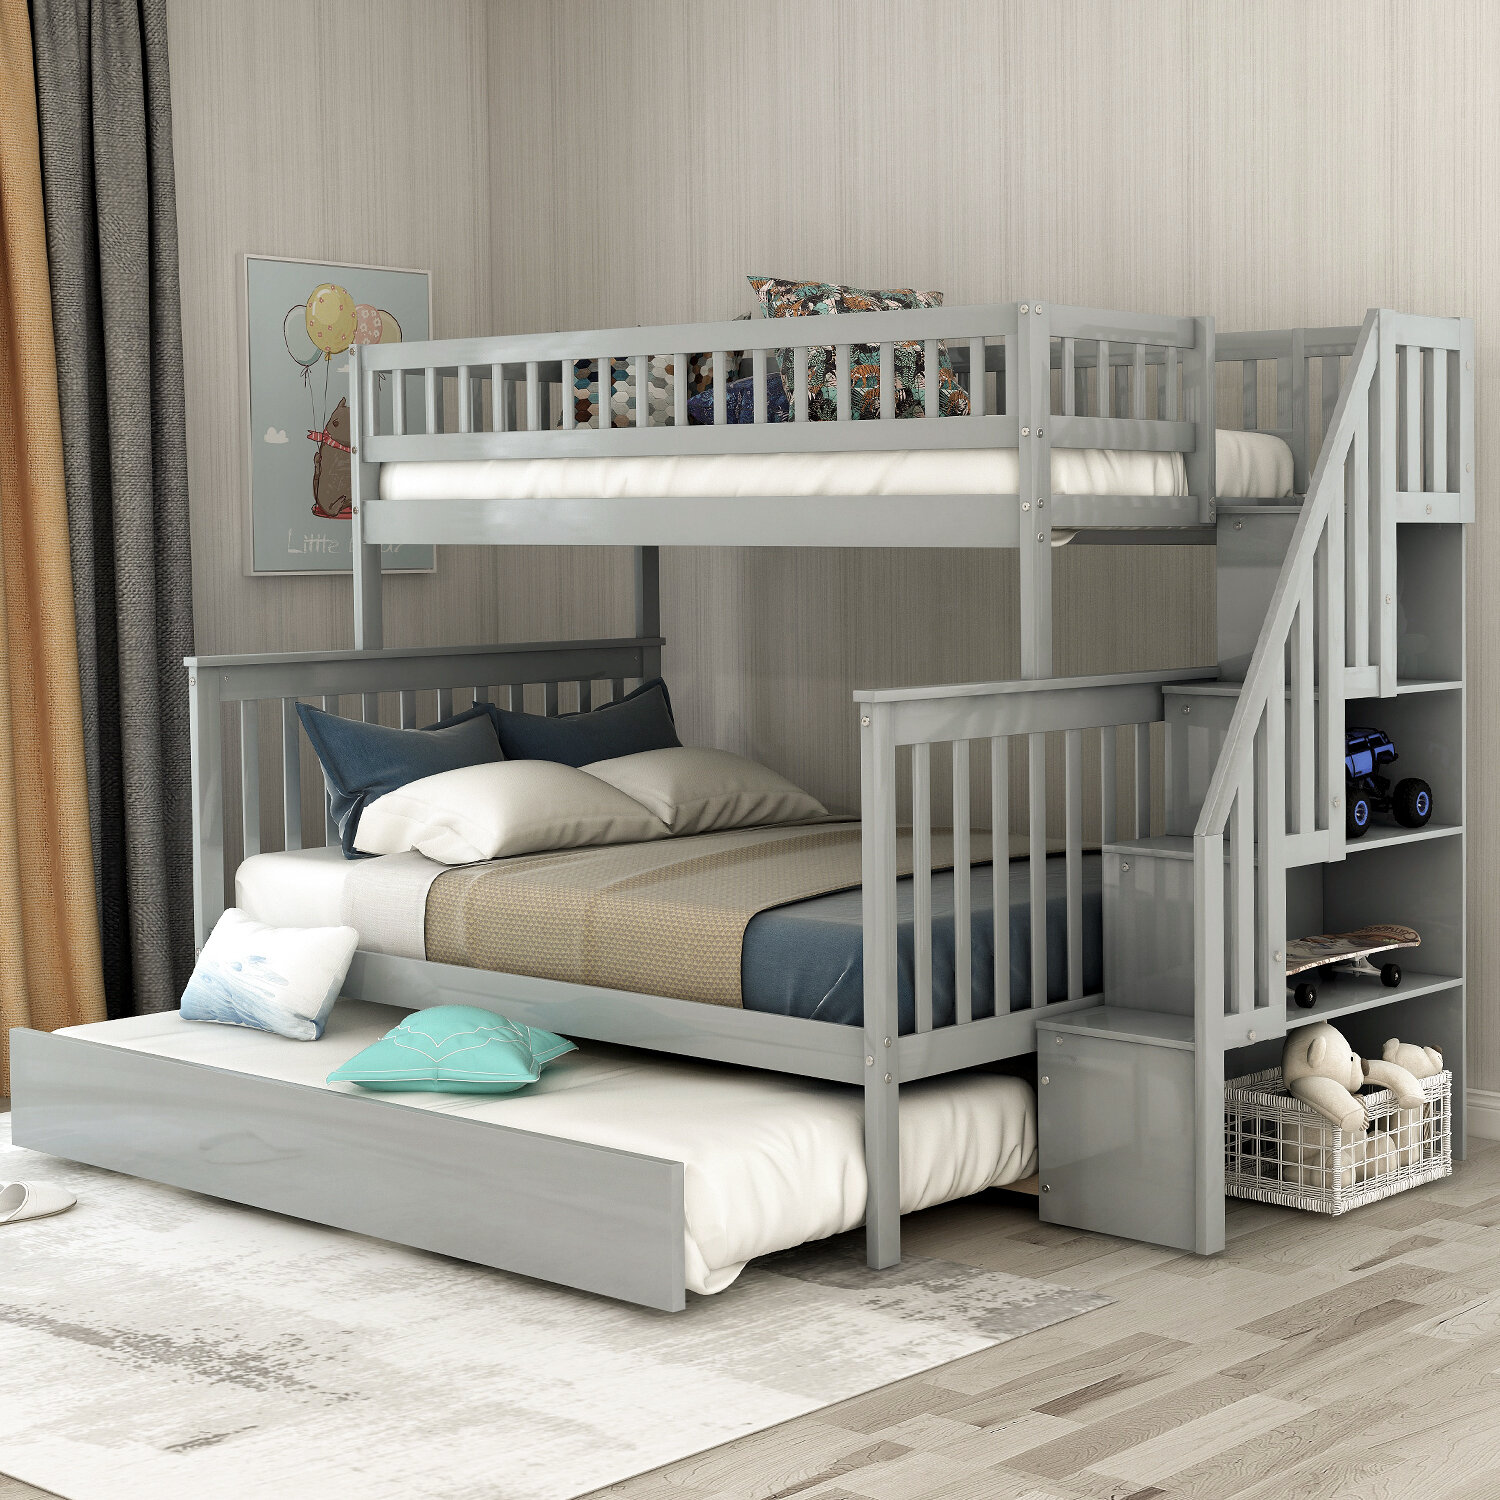 full size bed bunk beds